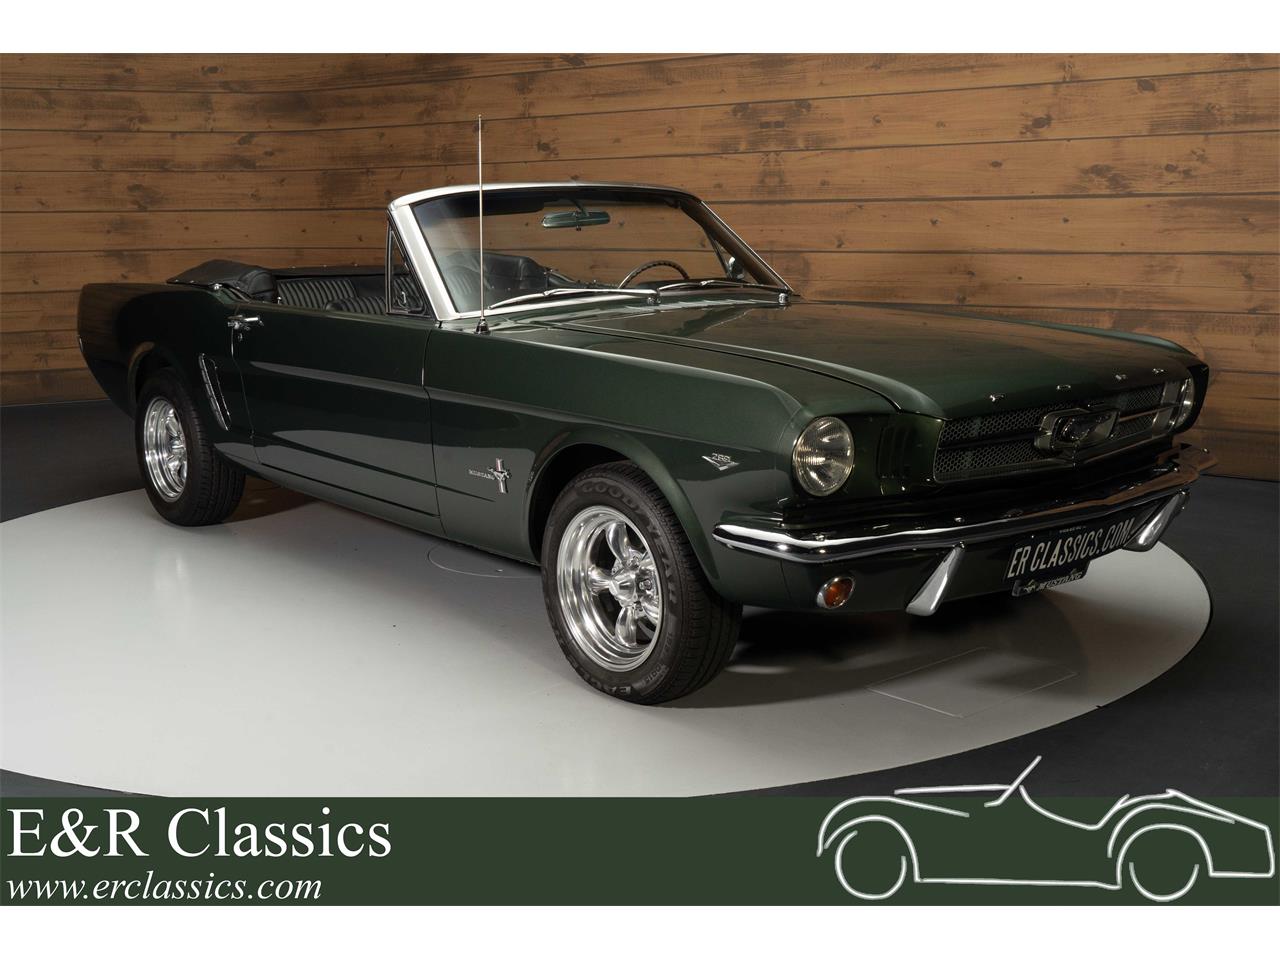 Ford Mustang for sale at ERclassics